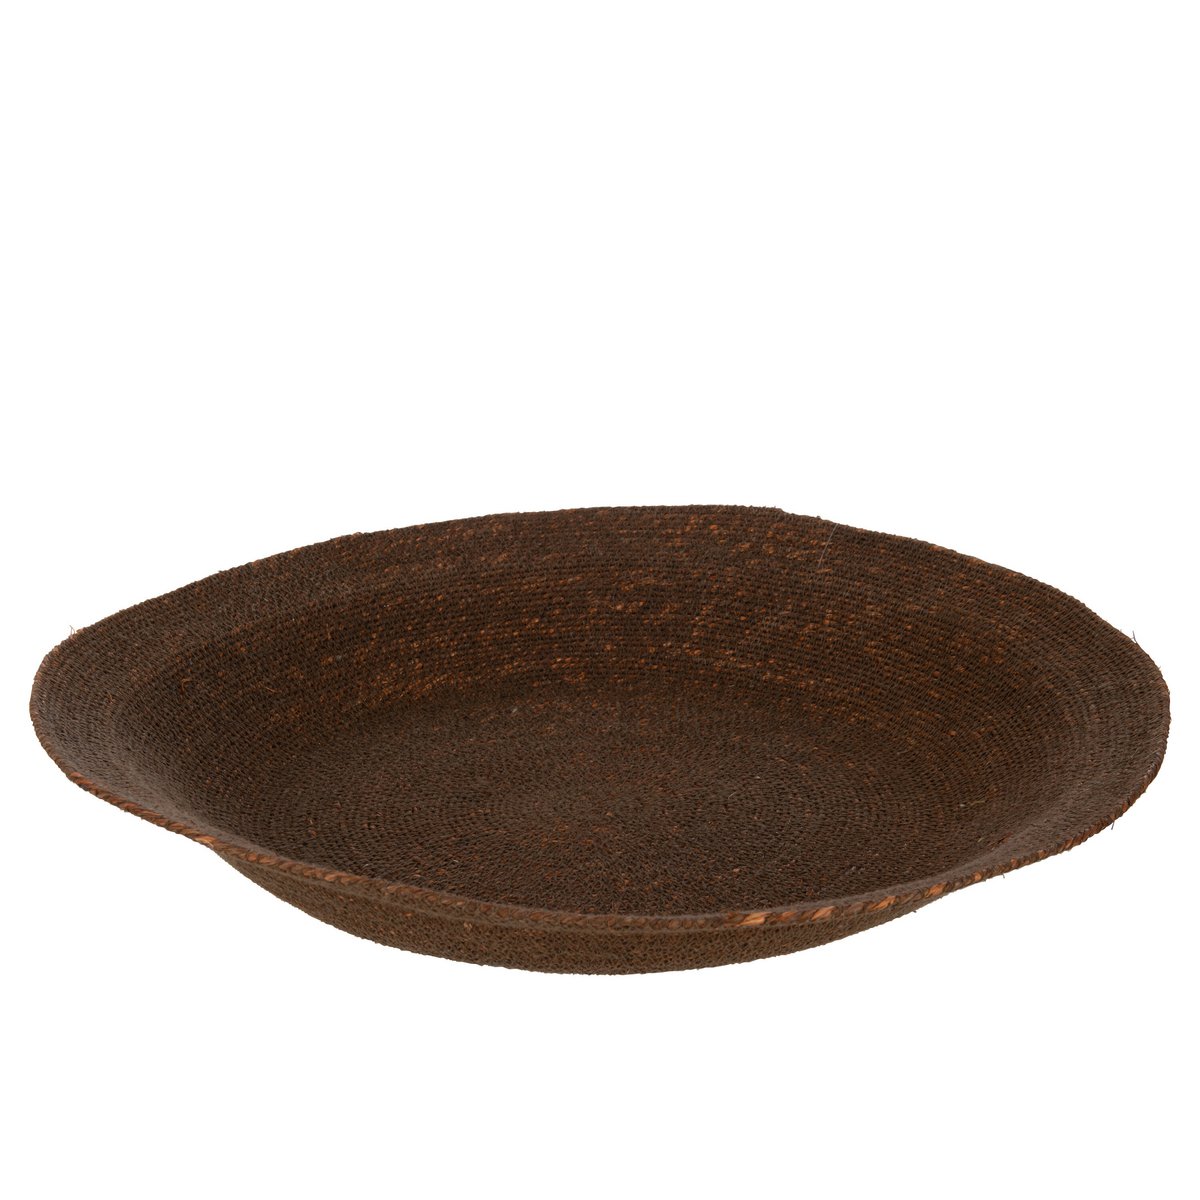 Deco Dish Marie made of seagrass, brown